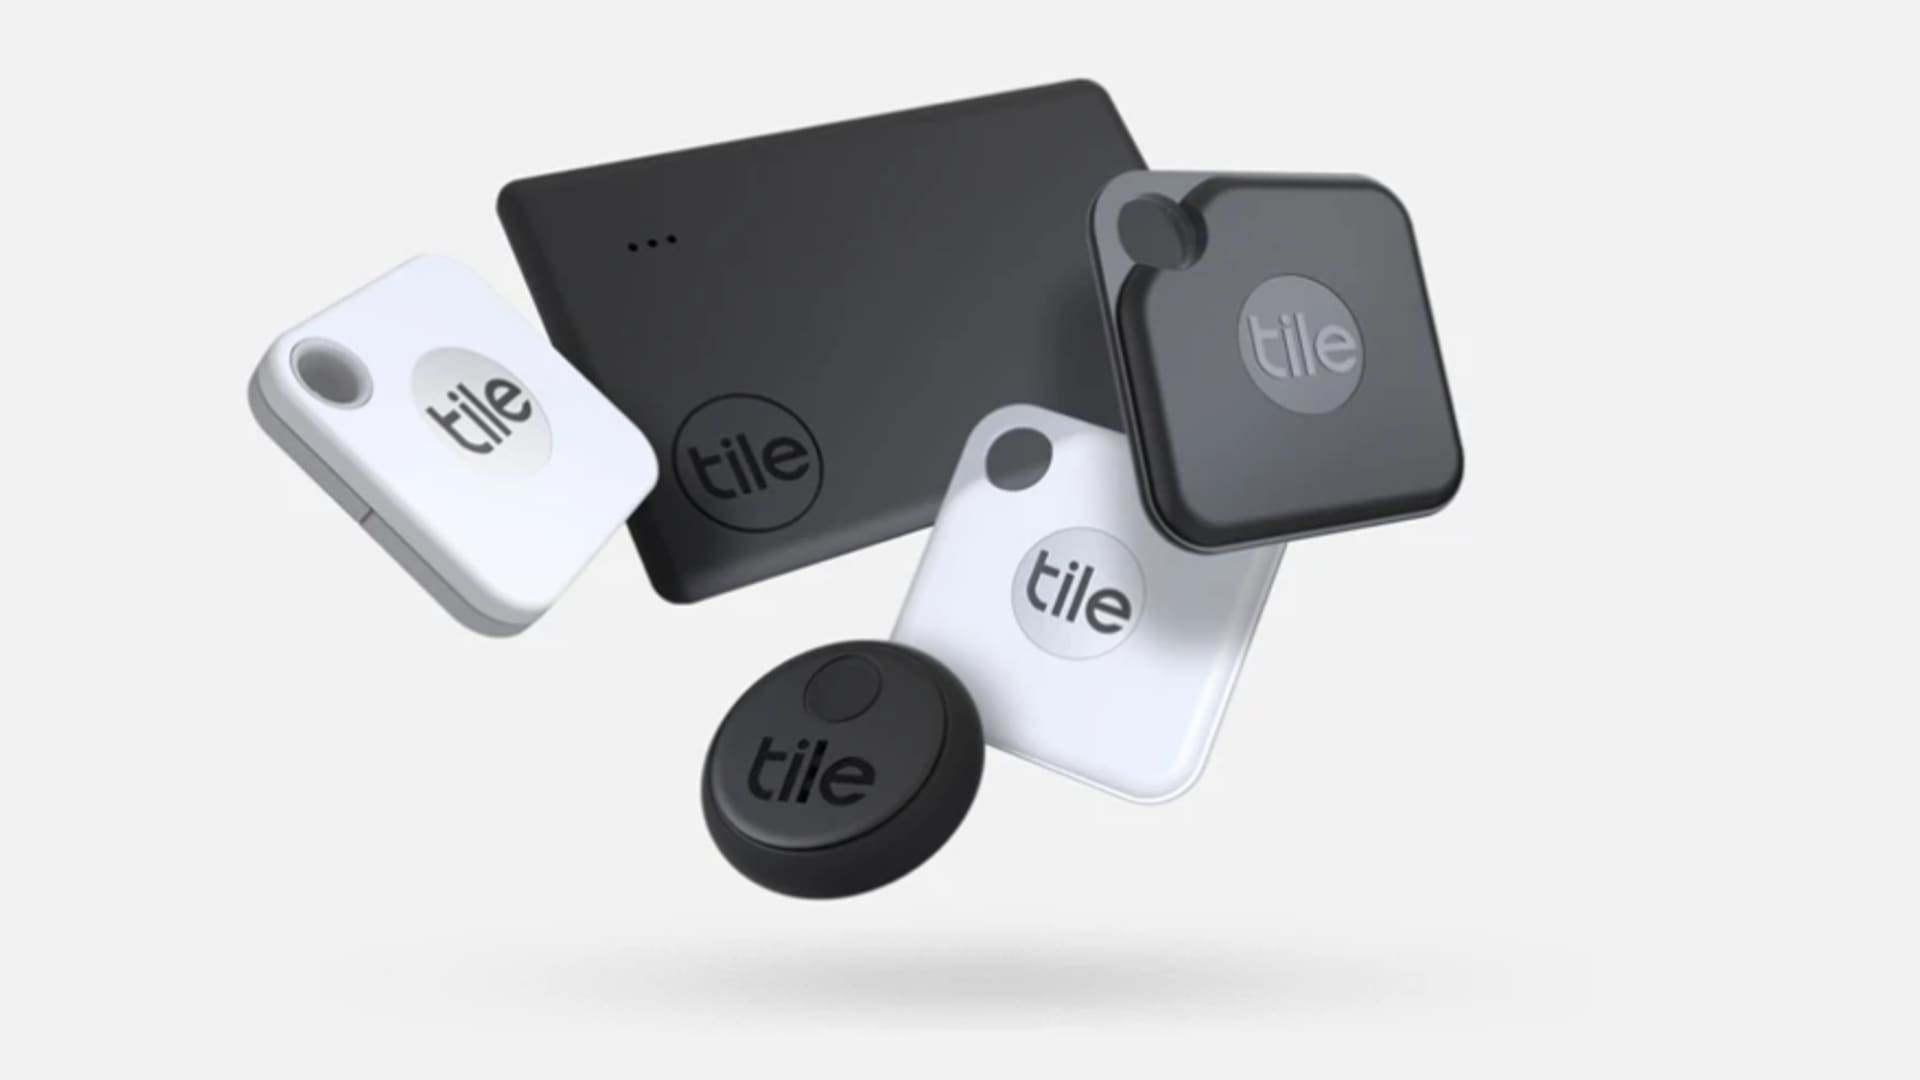 Tile has a bunch of tracker sizes and shapes.